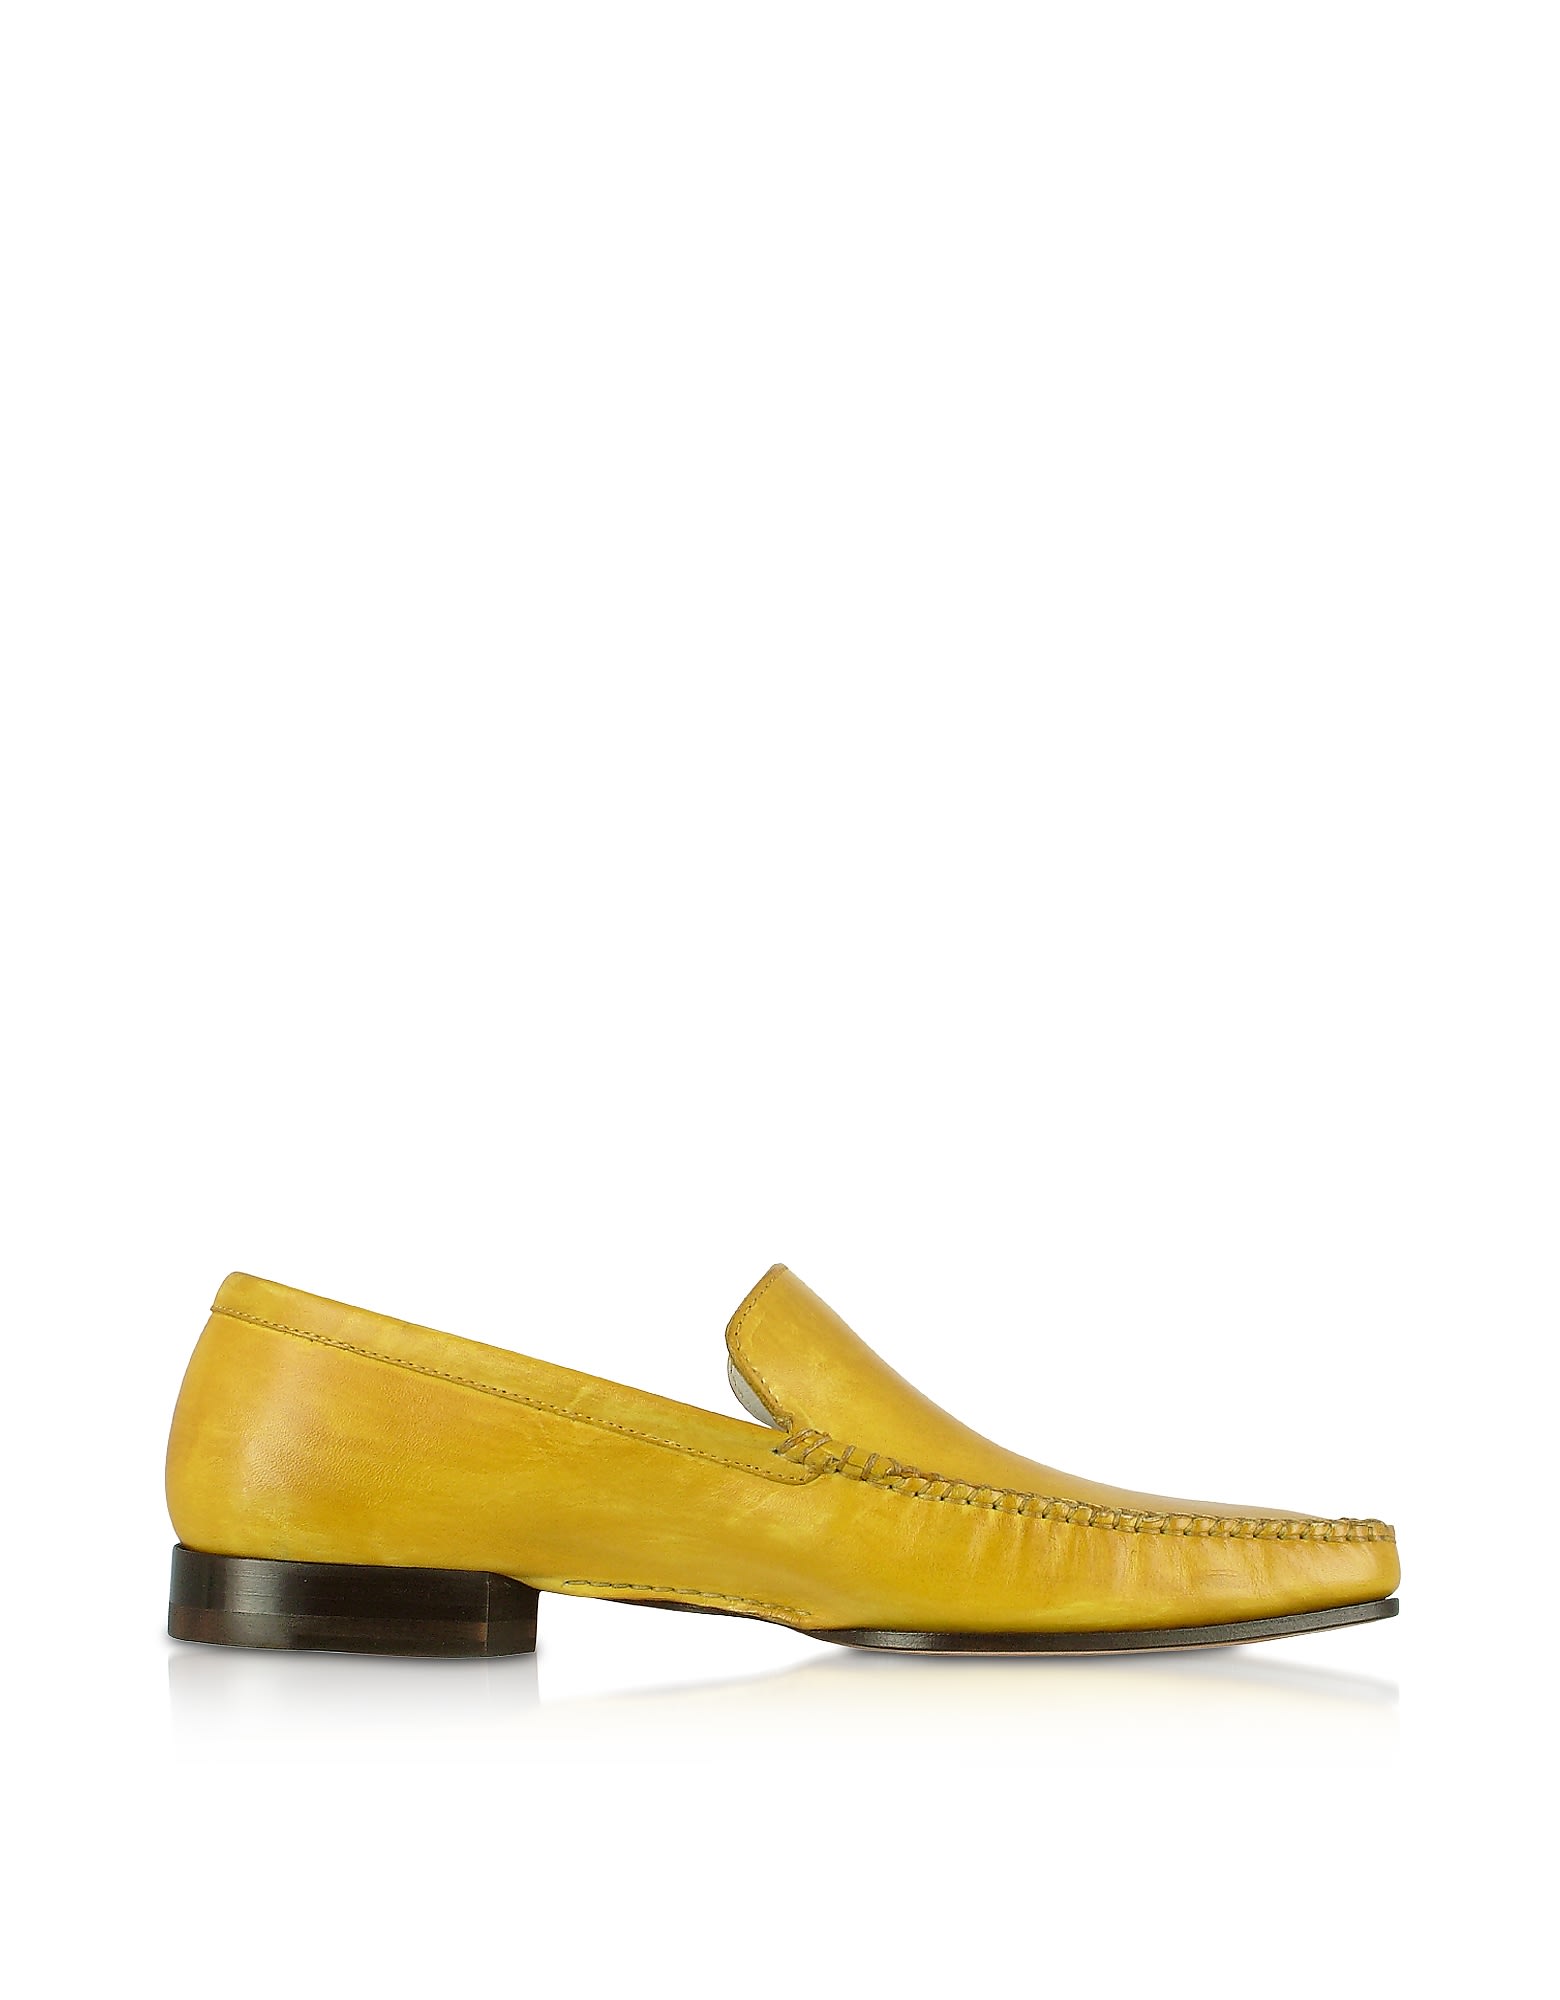 Pakerson Yellow Italian Handmade Leather Loafer Shoes